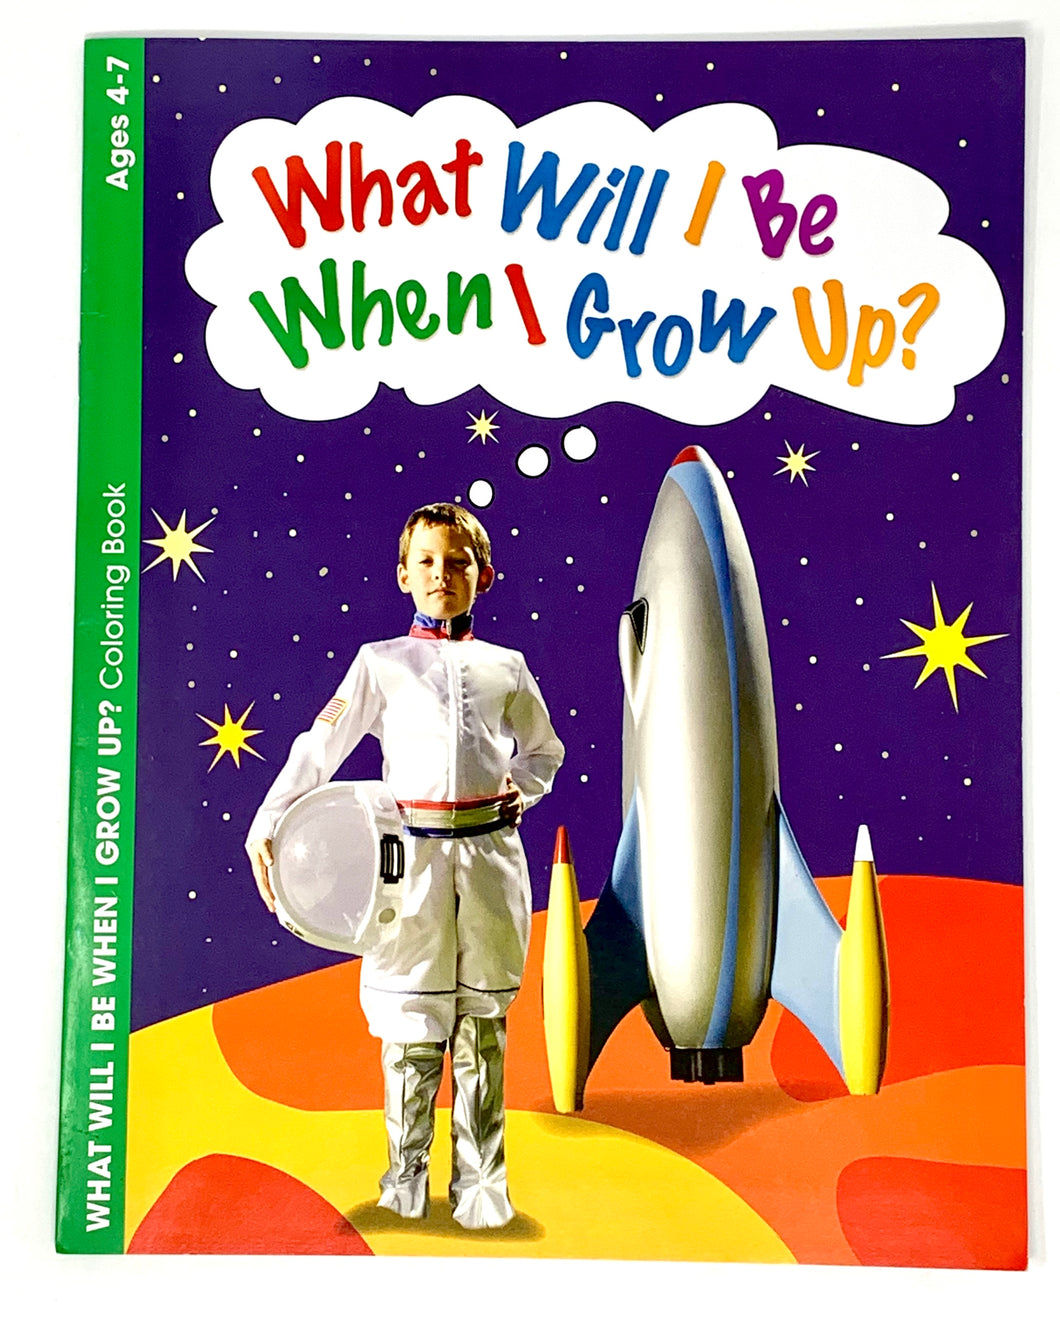 E4625 - WHAT WILL I BE WHEN GROW UP COLORING BOOK